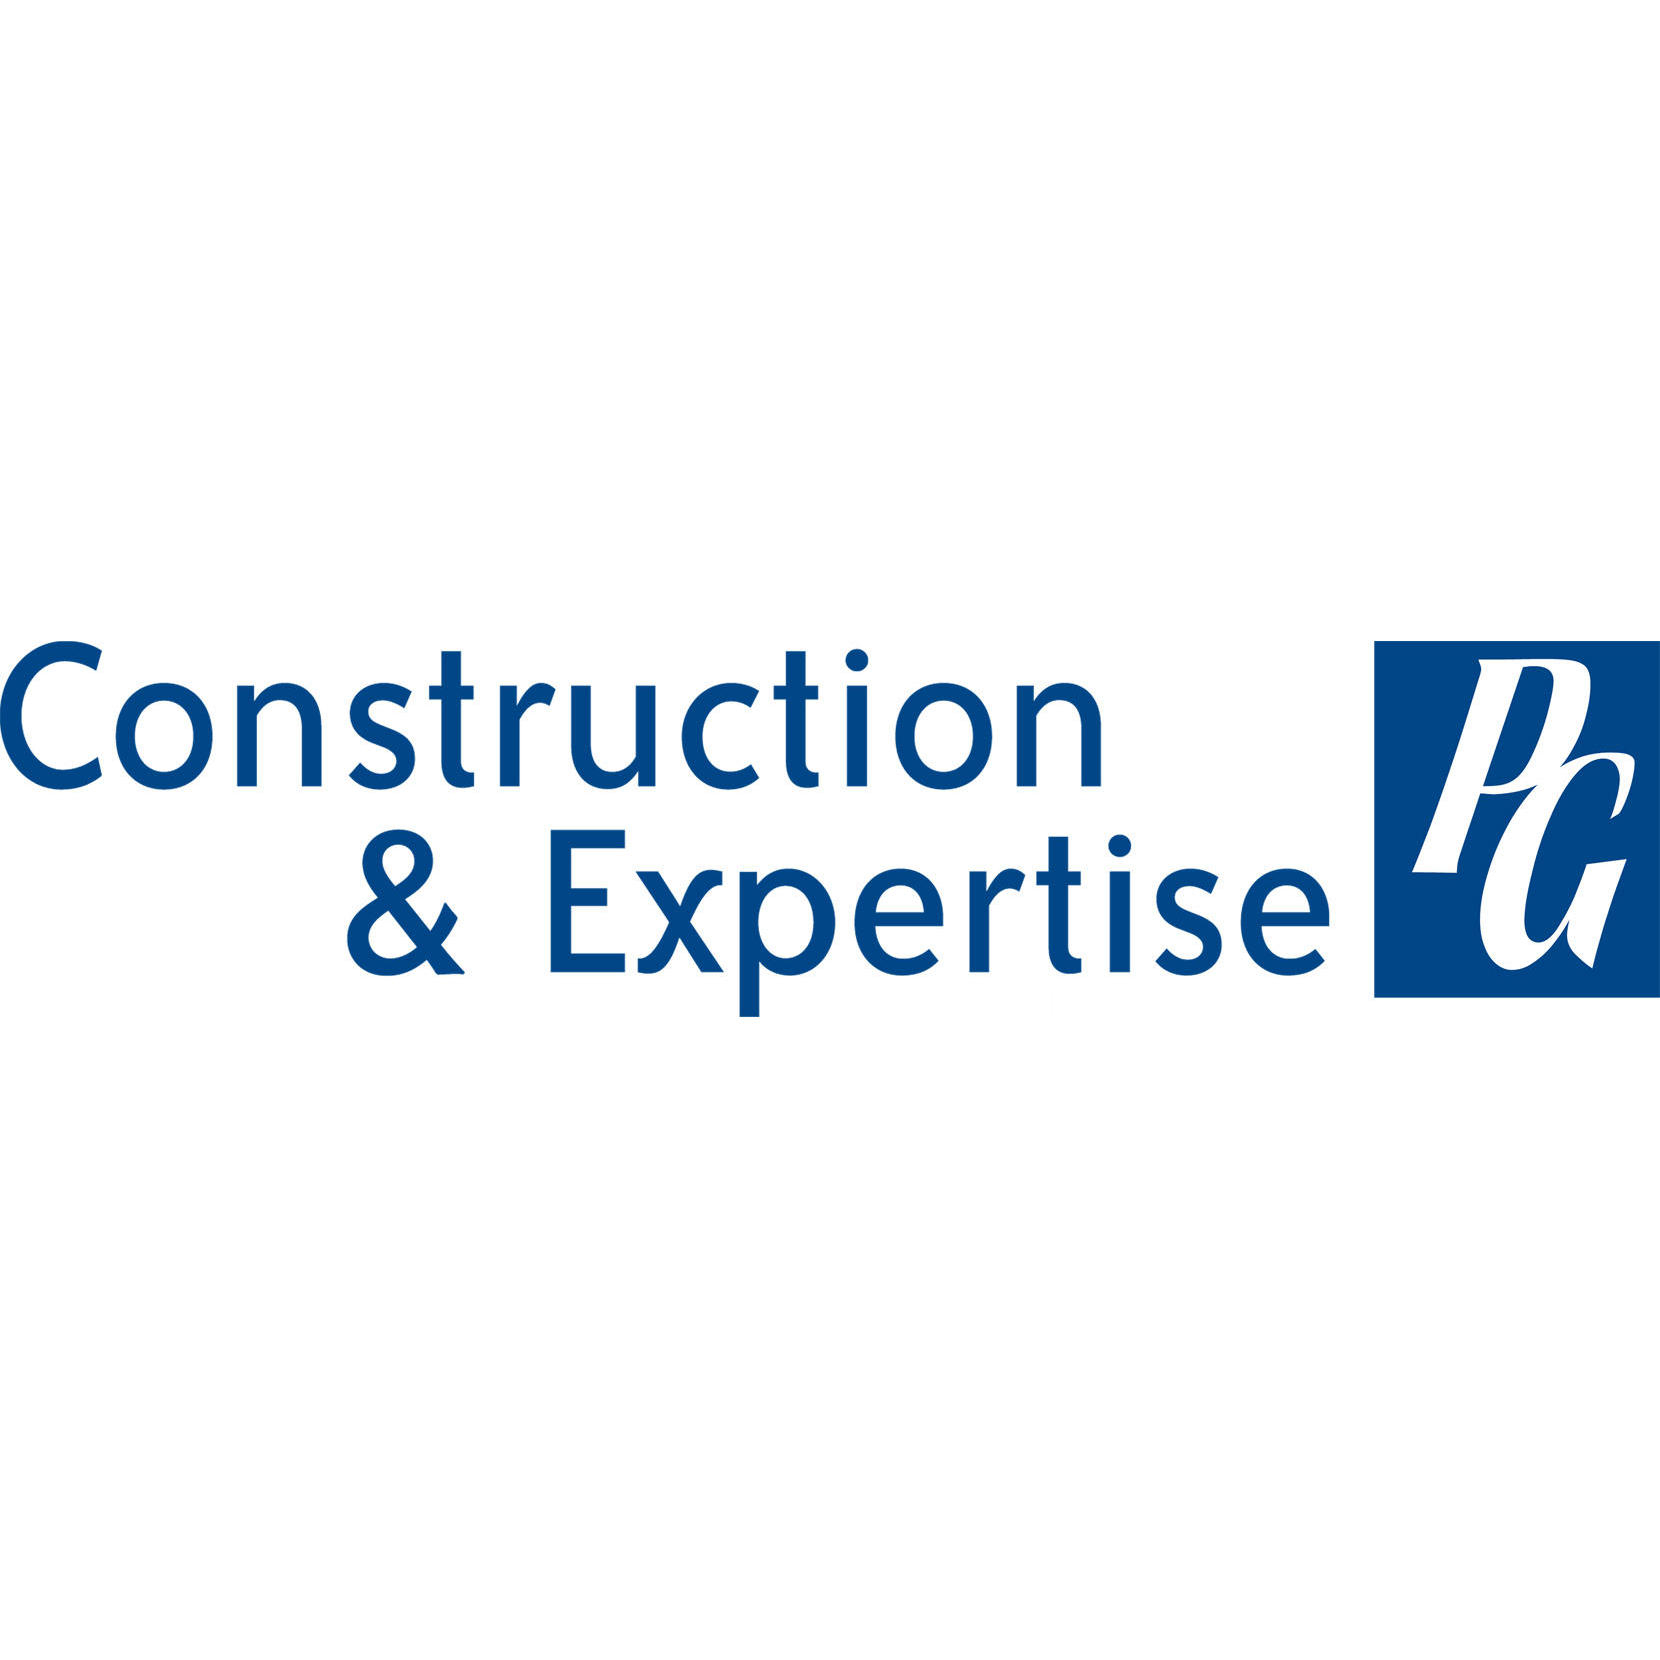 Construction & Expertise PG - Civil Engineers